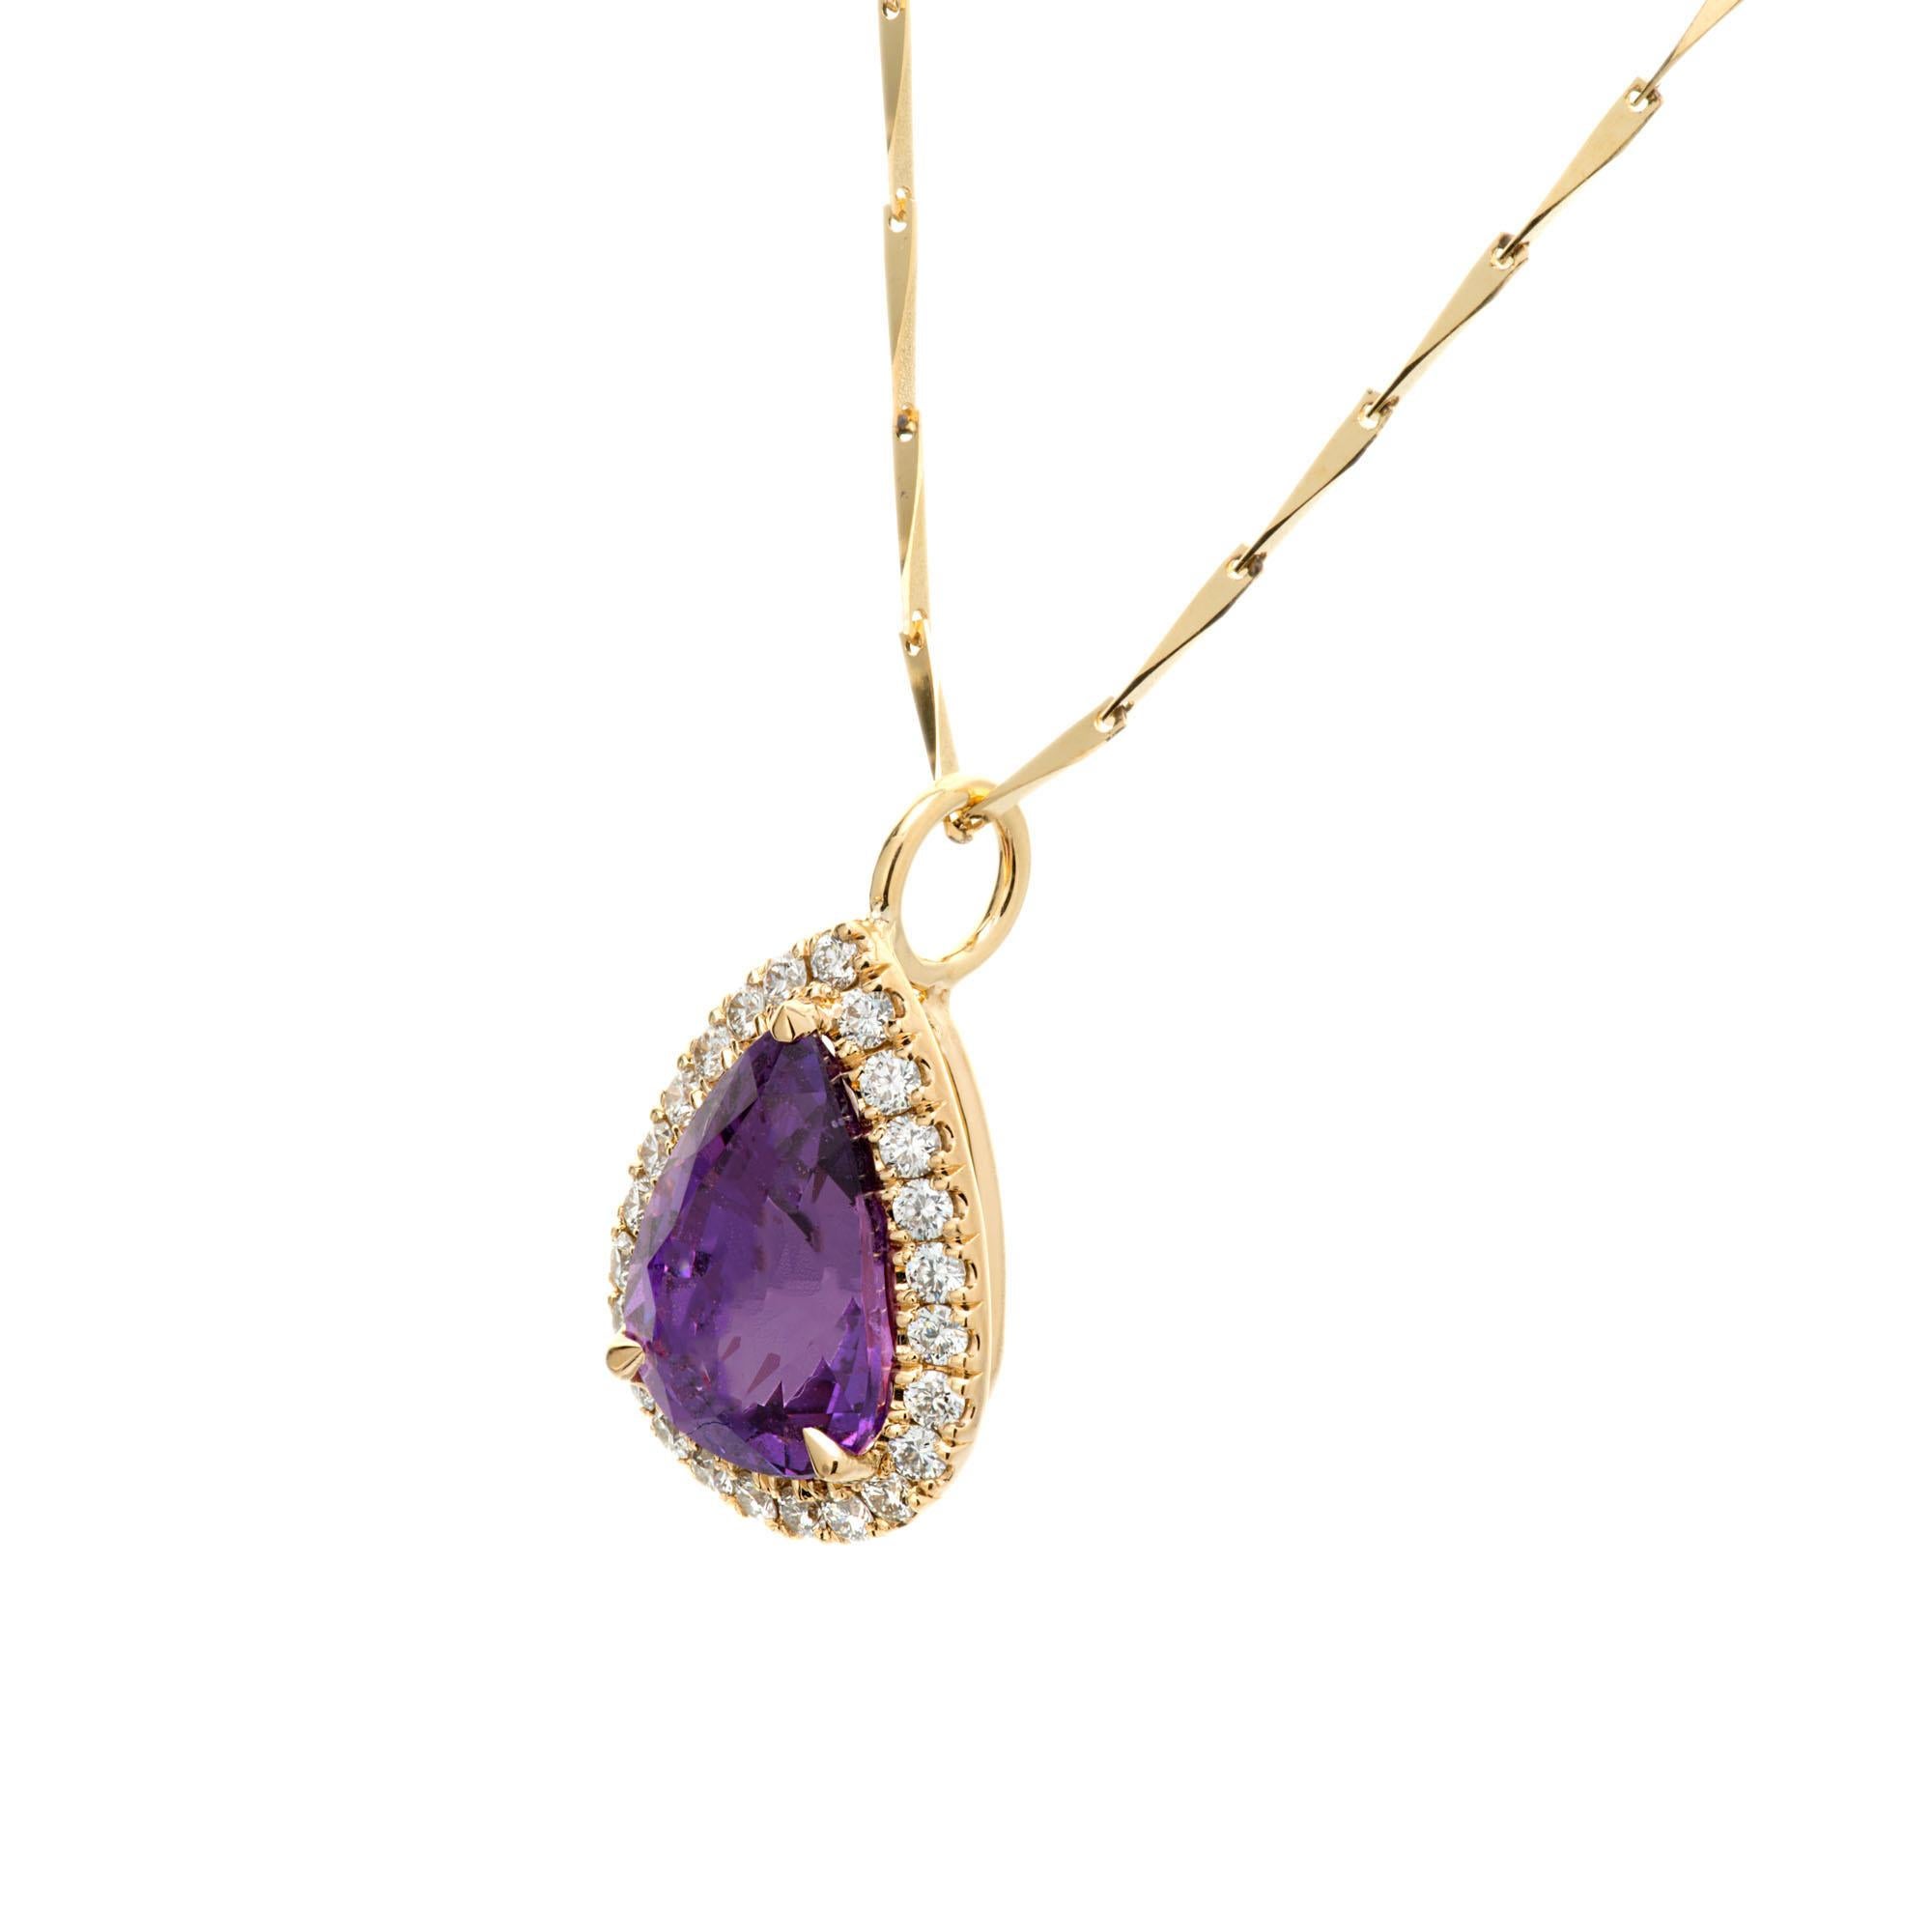 Purple natural untreated sapphire diamond pendant necklace. Pear shaped purple sapphire with a halo of 24 round brilliant cut diamonds set in 18k yellow gold. 15.75 inch chain. Designed and crafted in the Peter Suchy workshop.

1 pear shaped purple